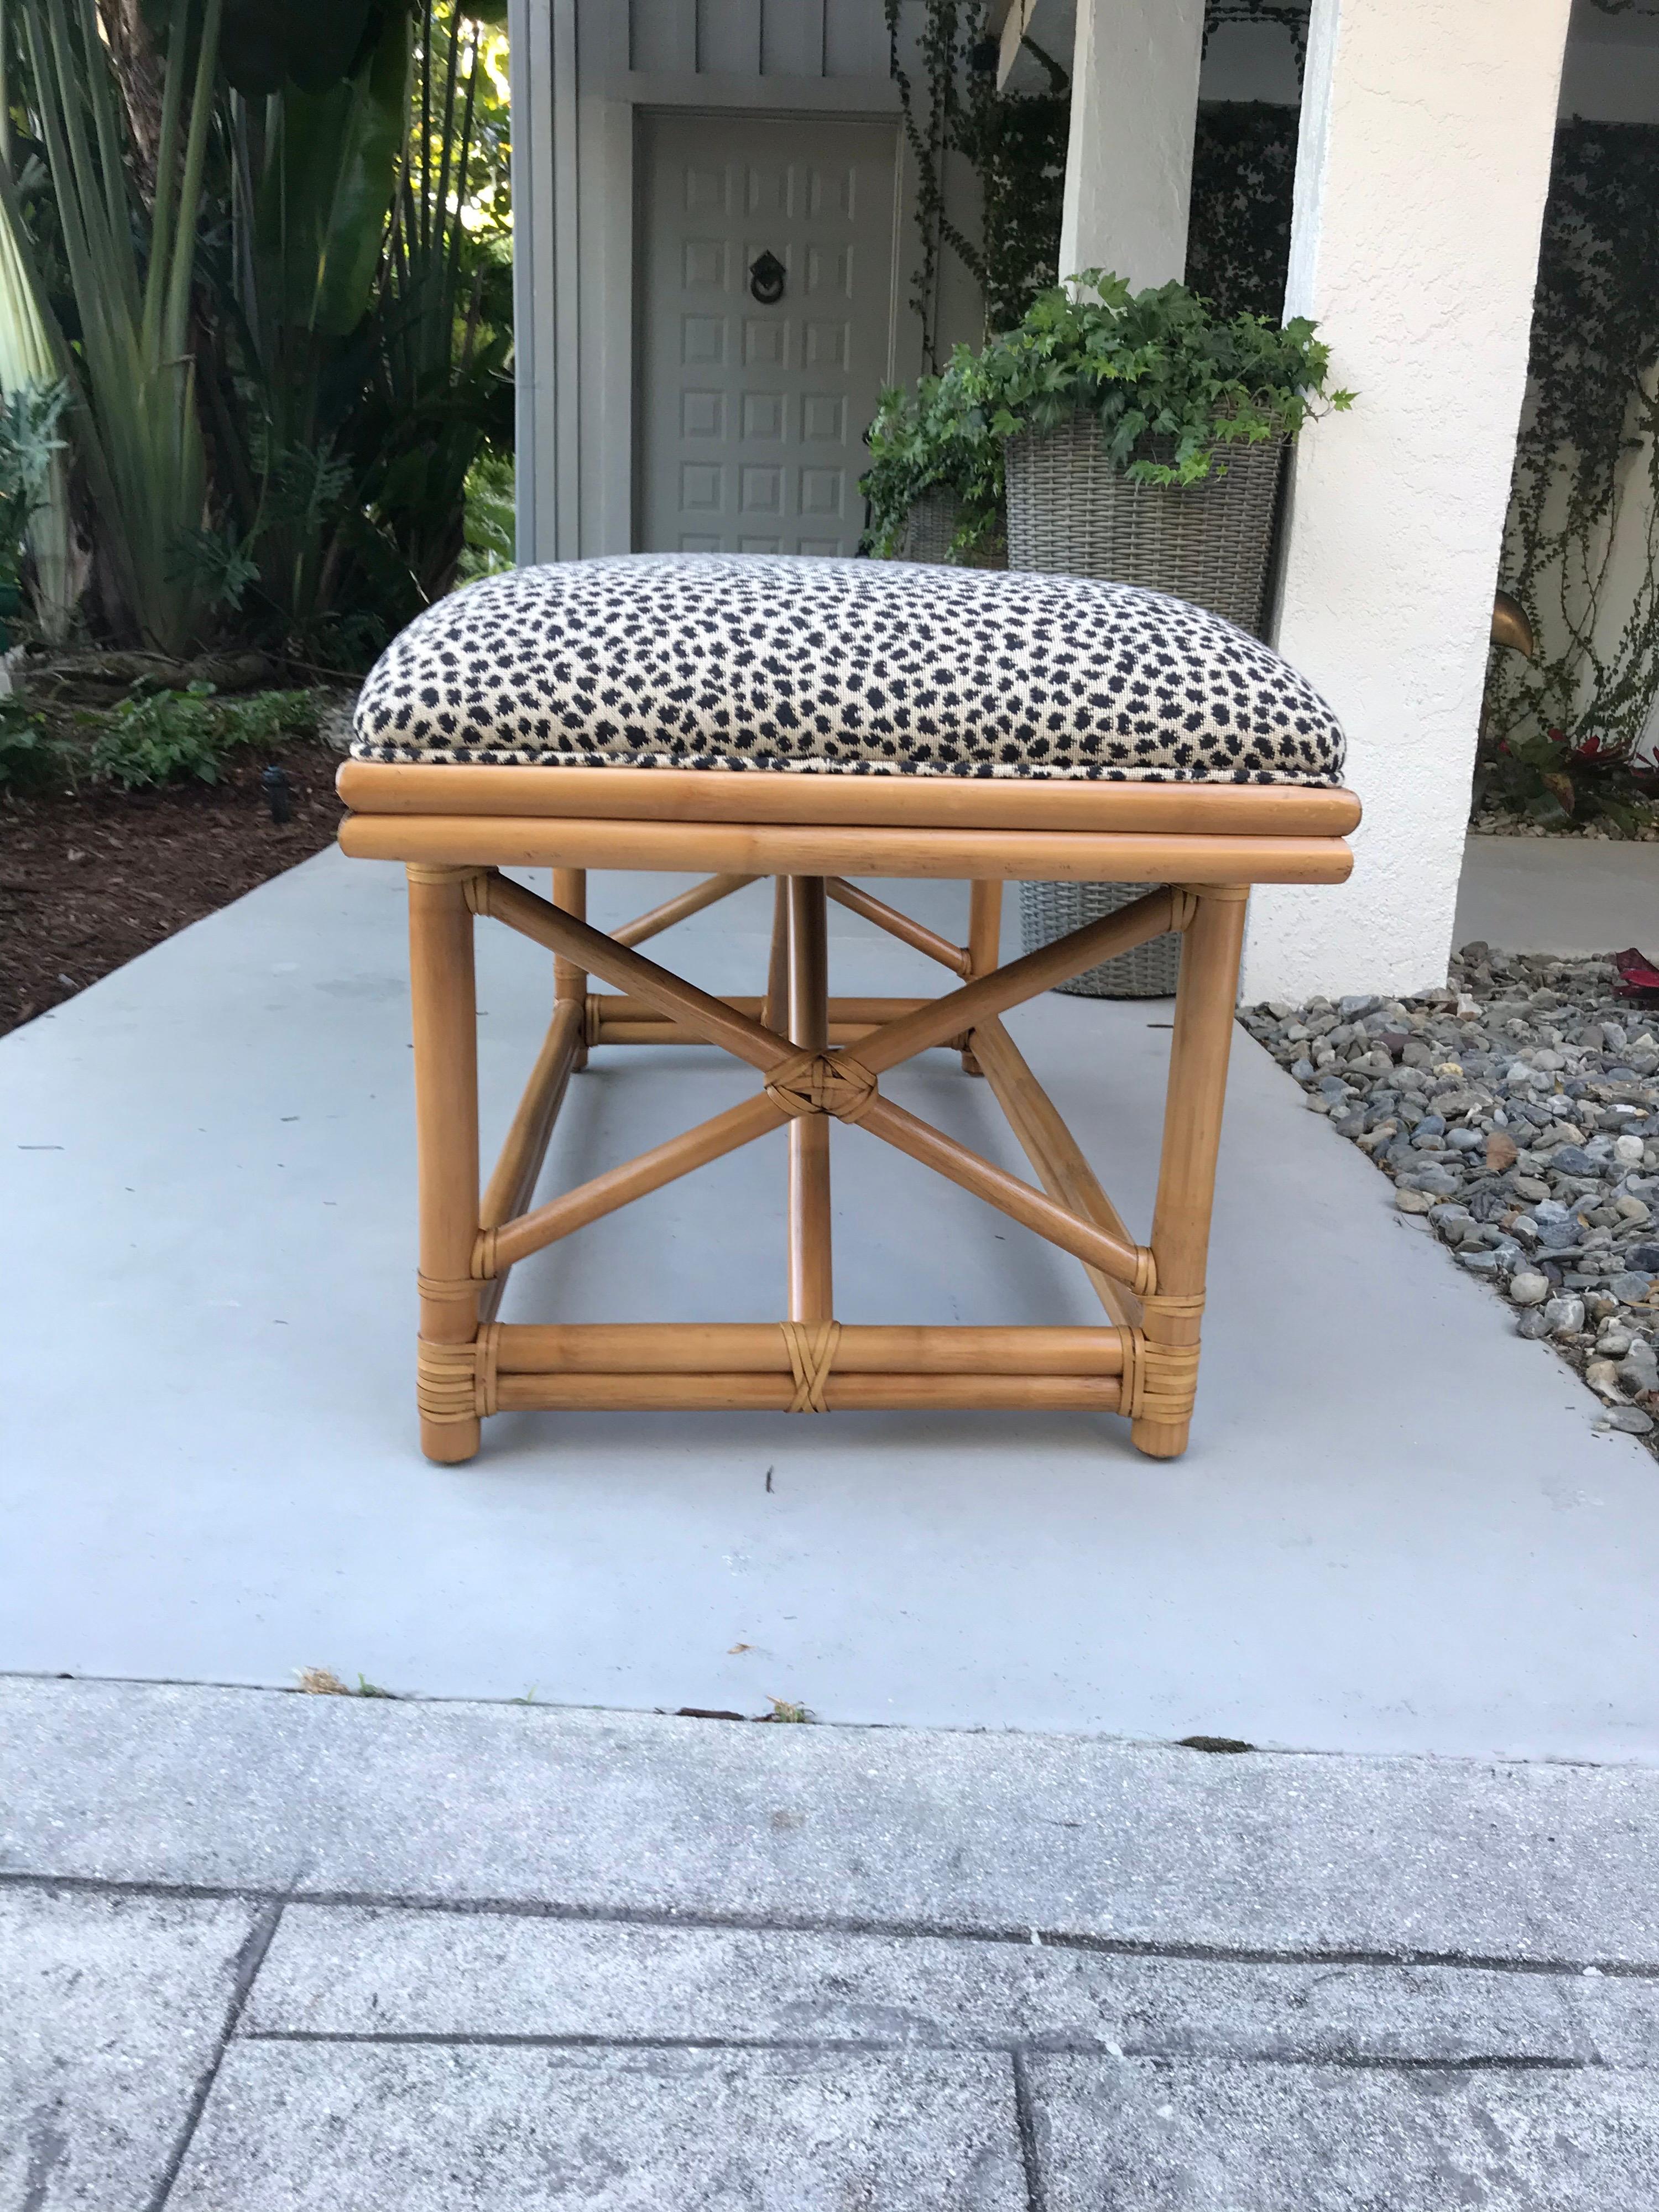 This is a Ficks Reed bamboo bench with animal print upholstery in great condition.